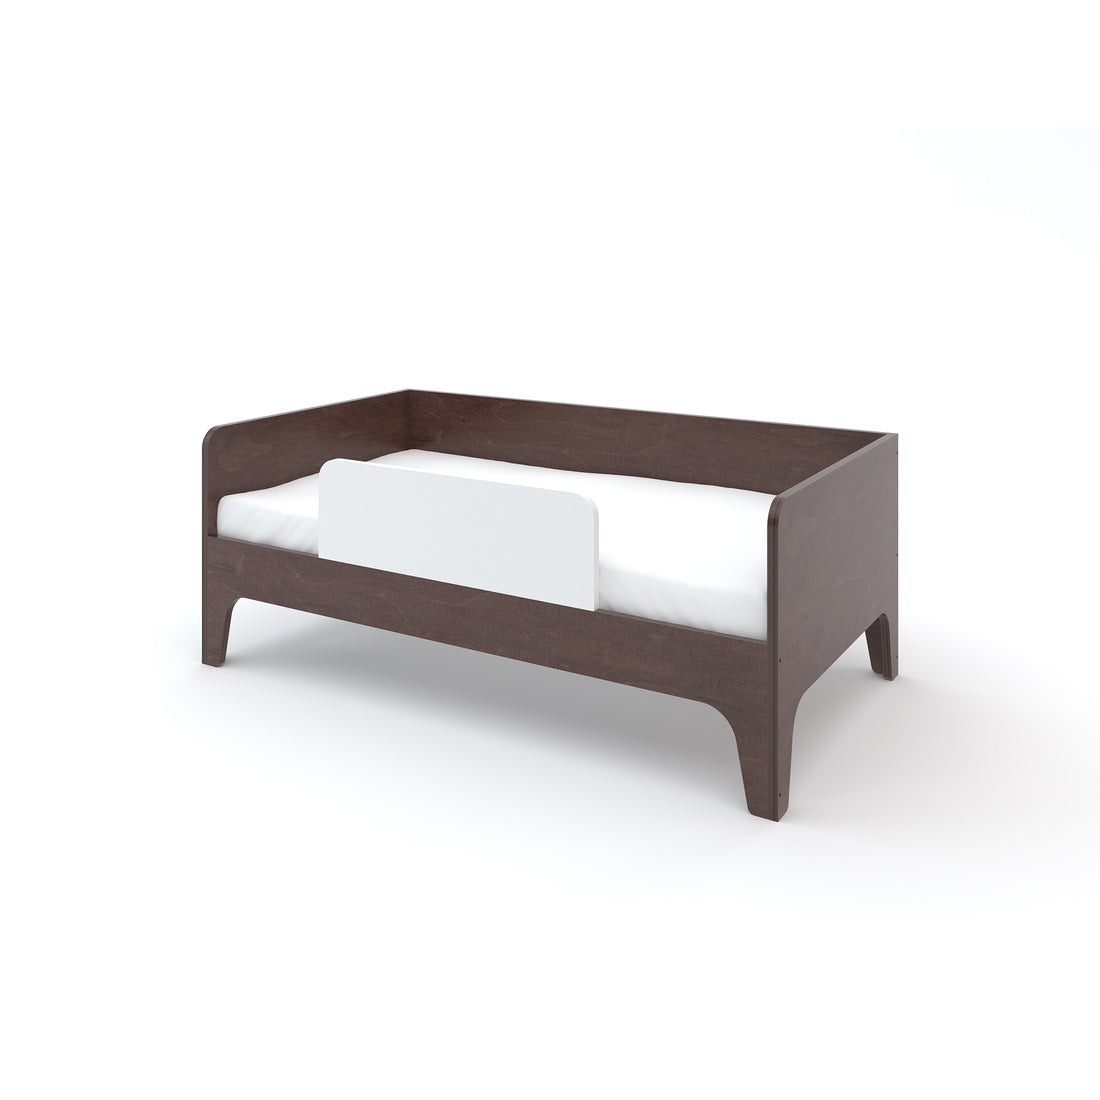 Oeuf Perch Toddler Bed Walnut